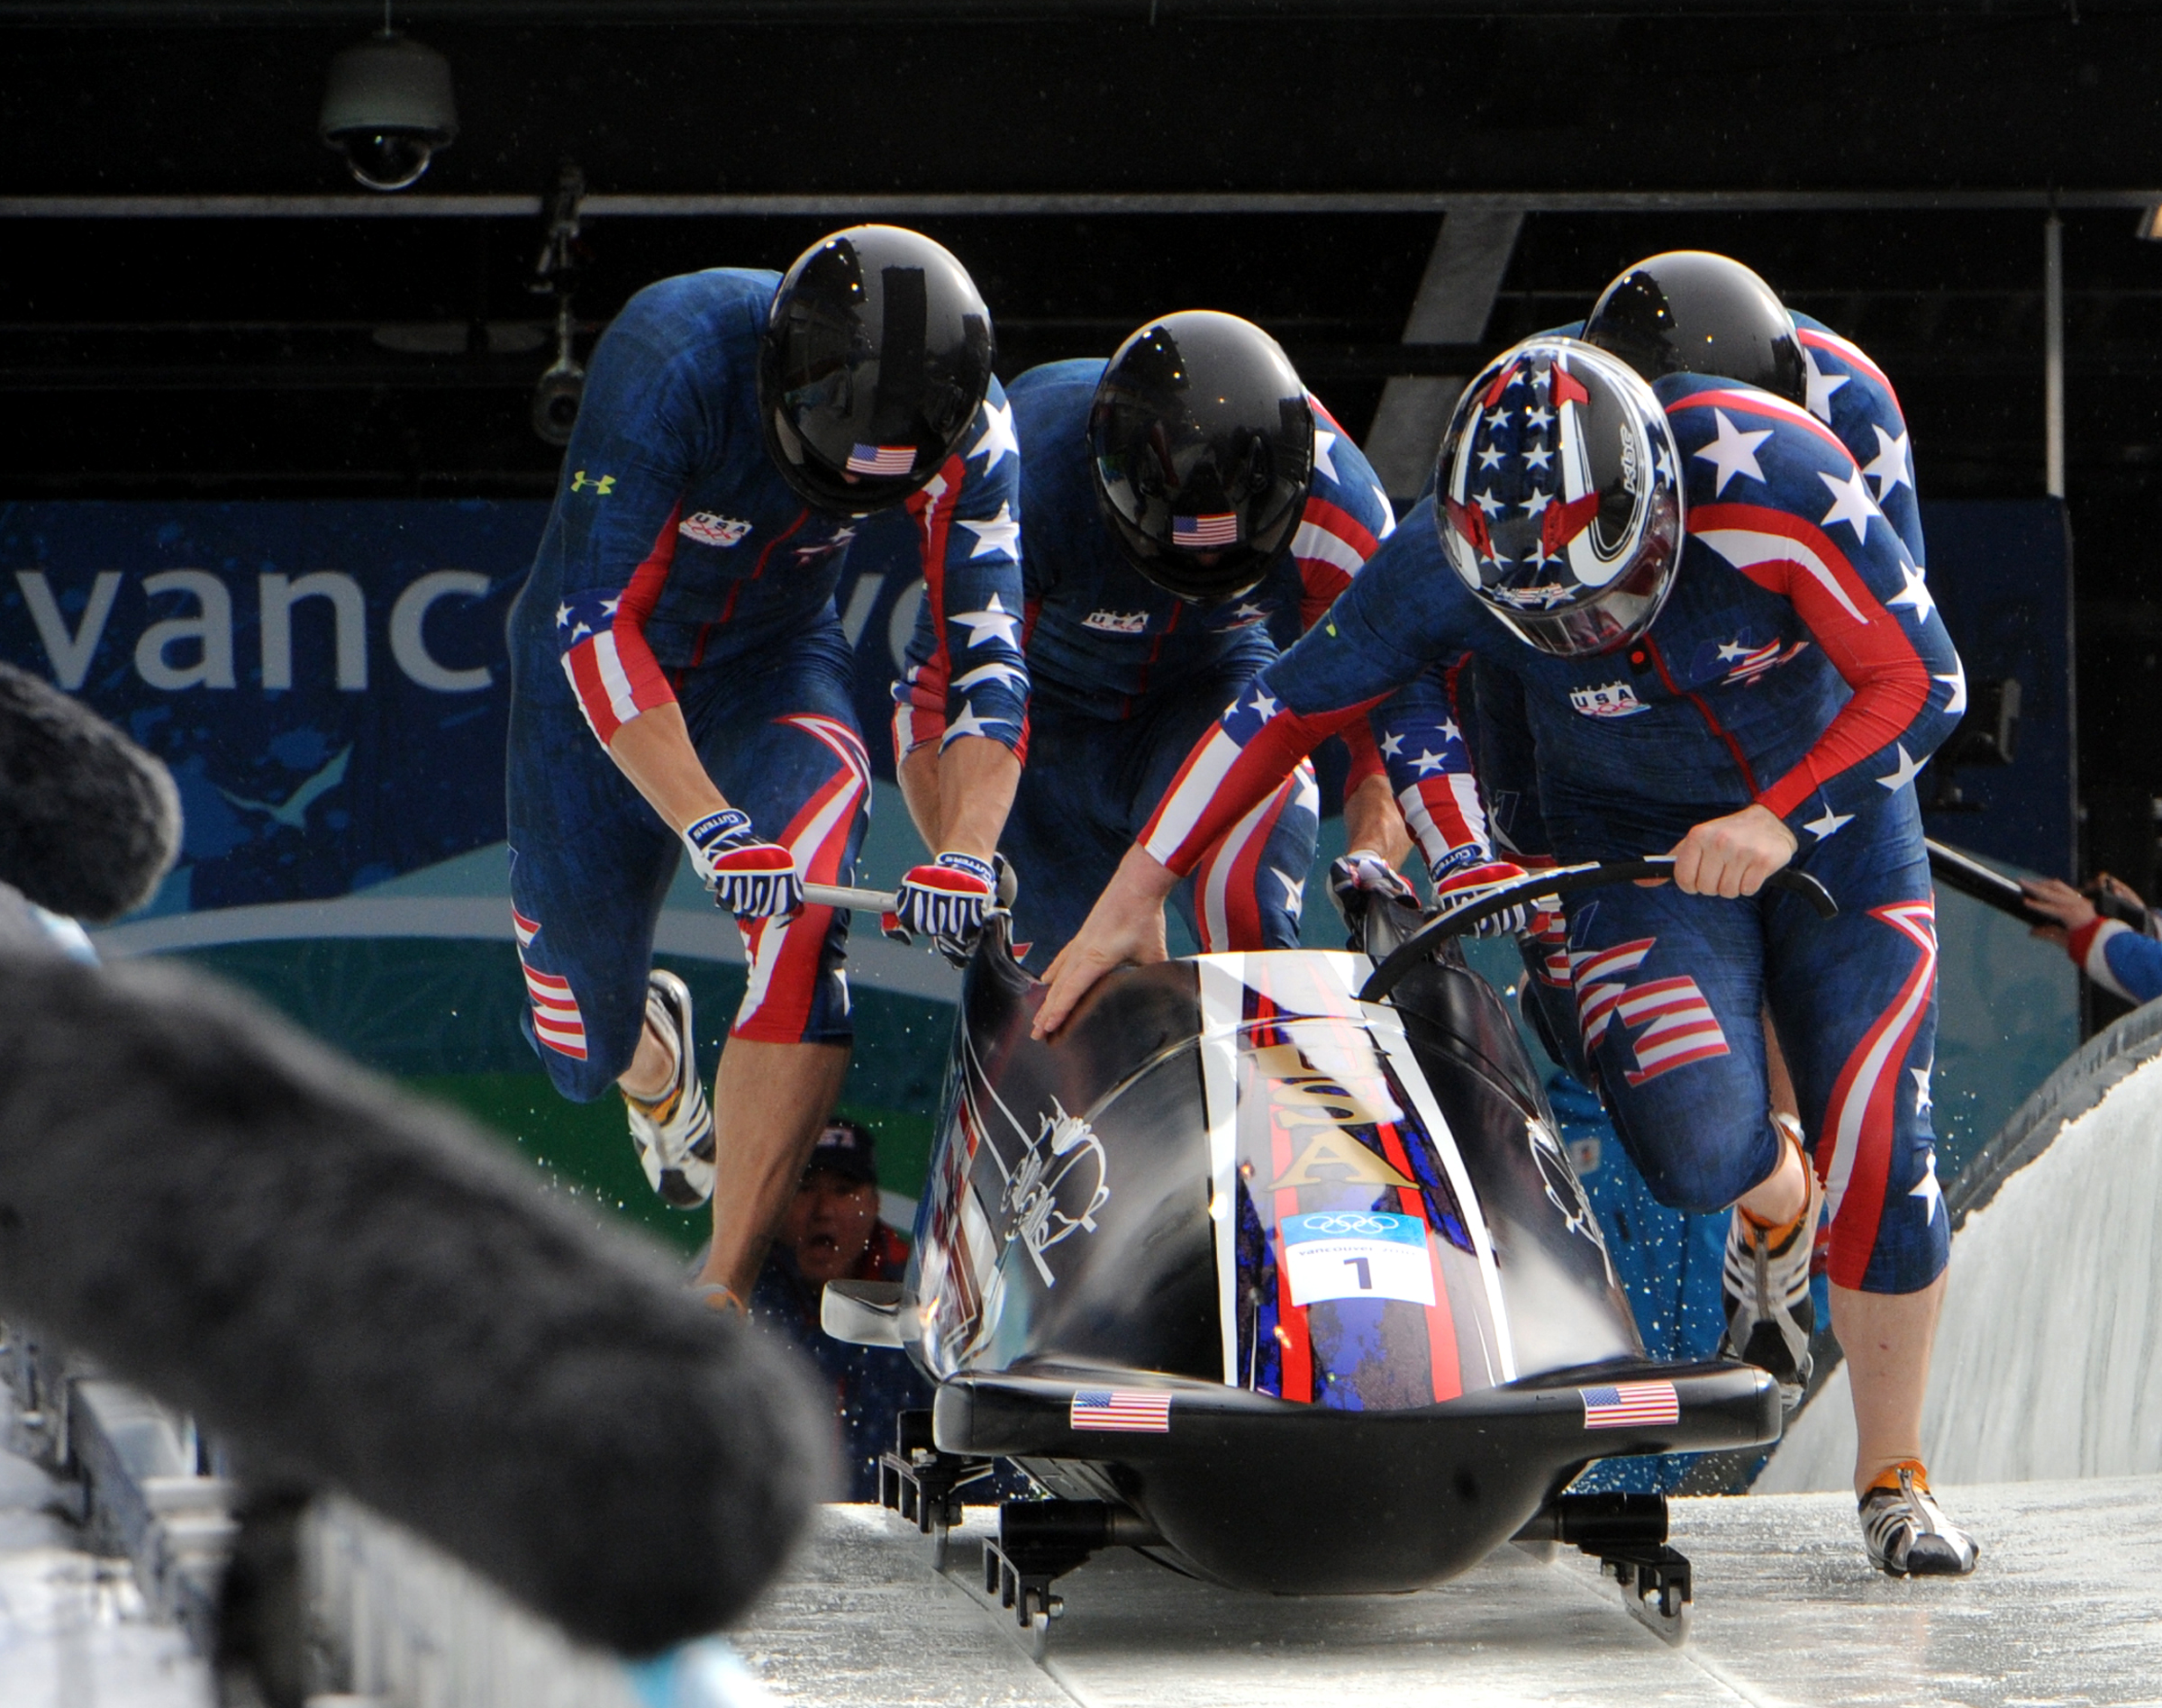 Bobsled race photo